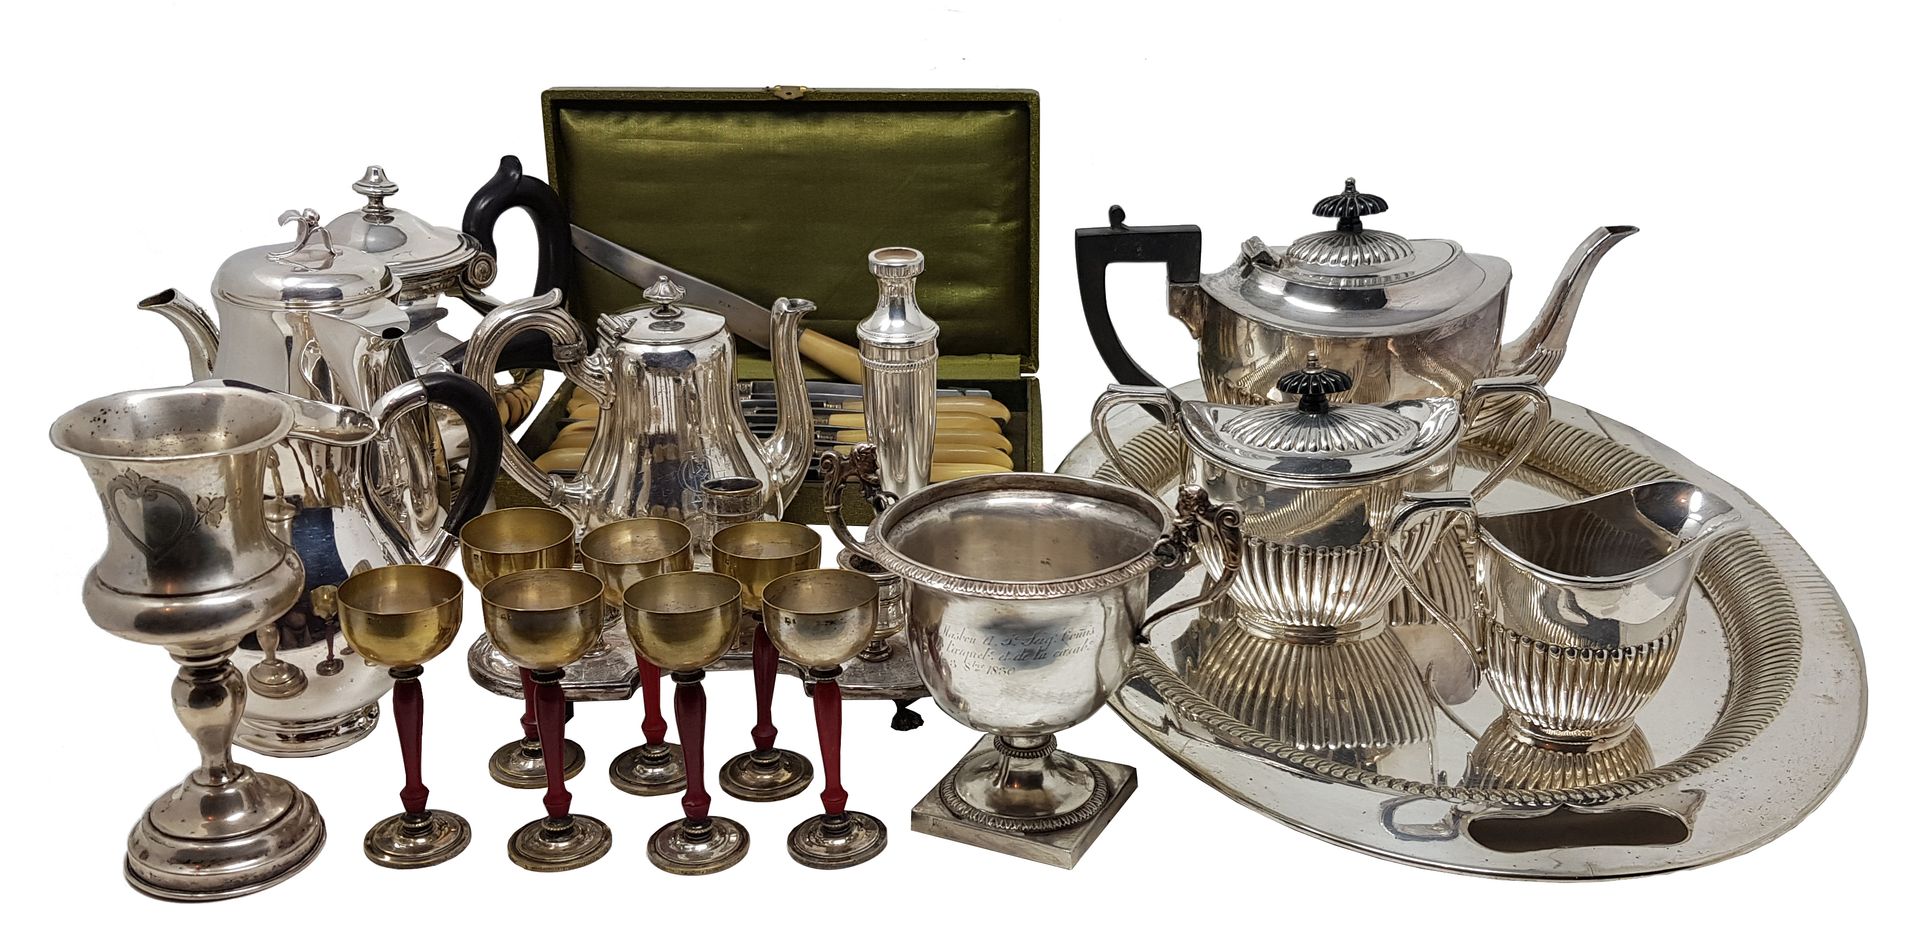 LOT MÉTAL ARGENTÉ 
Silvered metal set, scratches, shocks and stains from use.


&hellip;